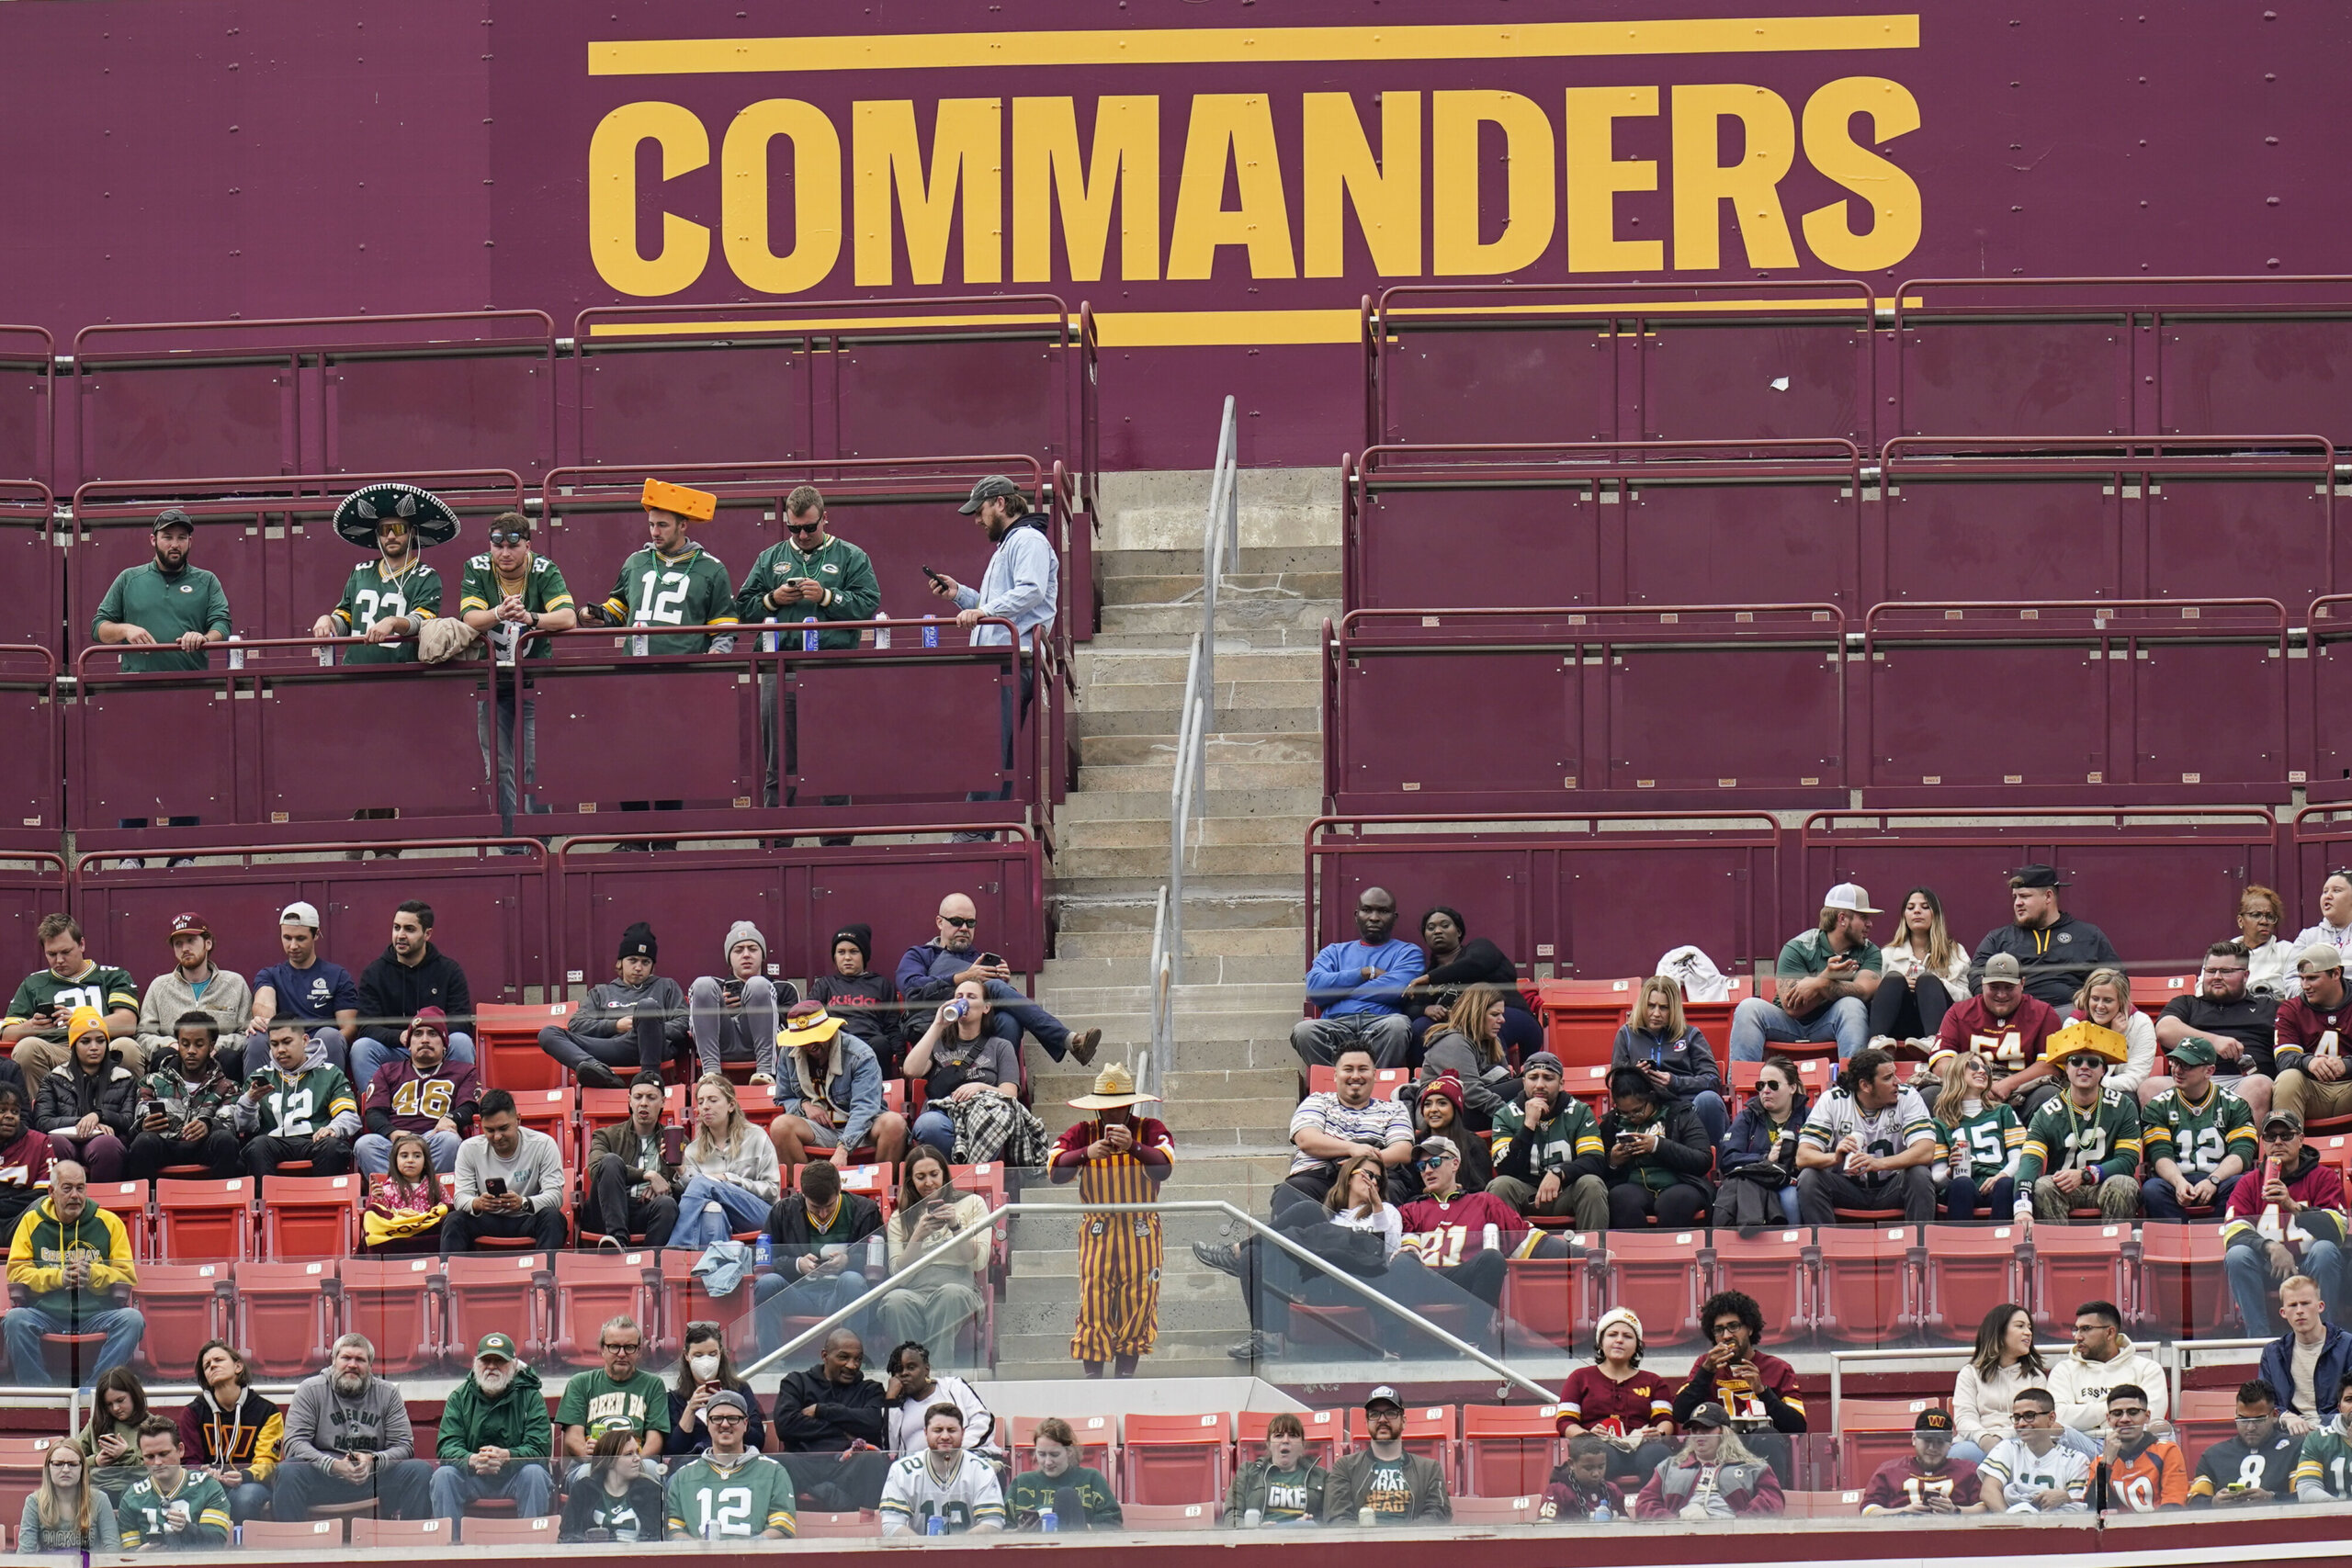 Washington Commanders' banner spotted inside FedExField just hours